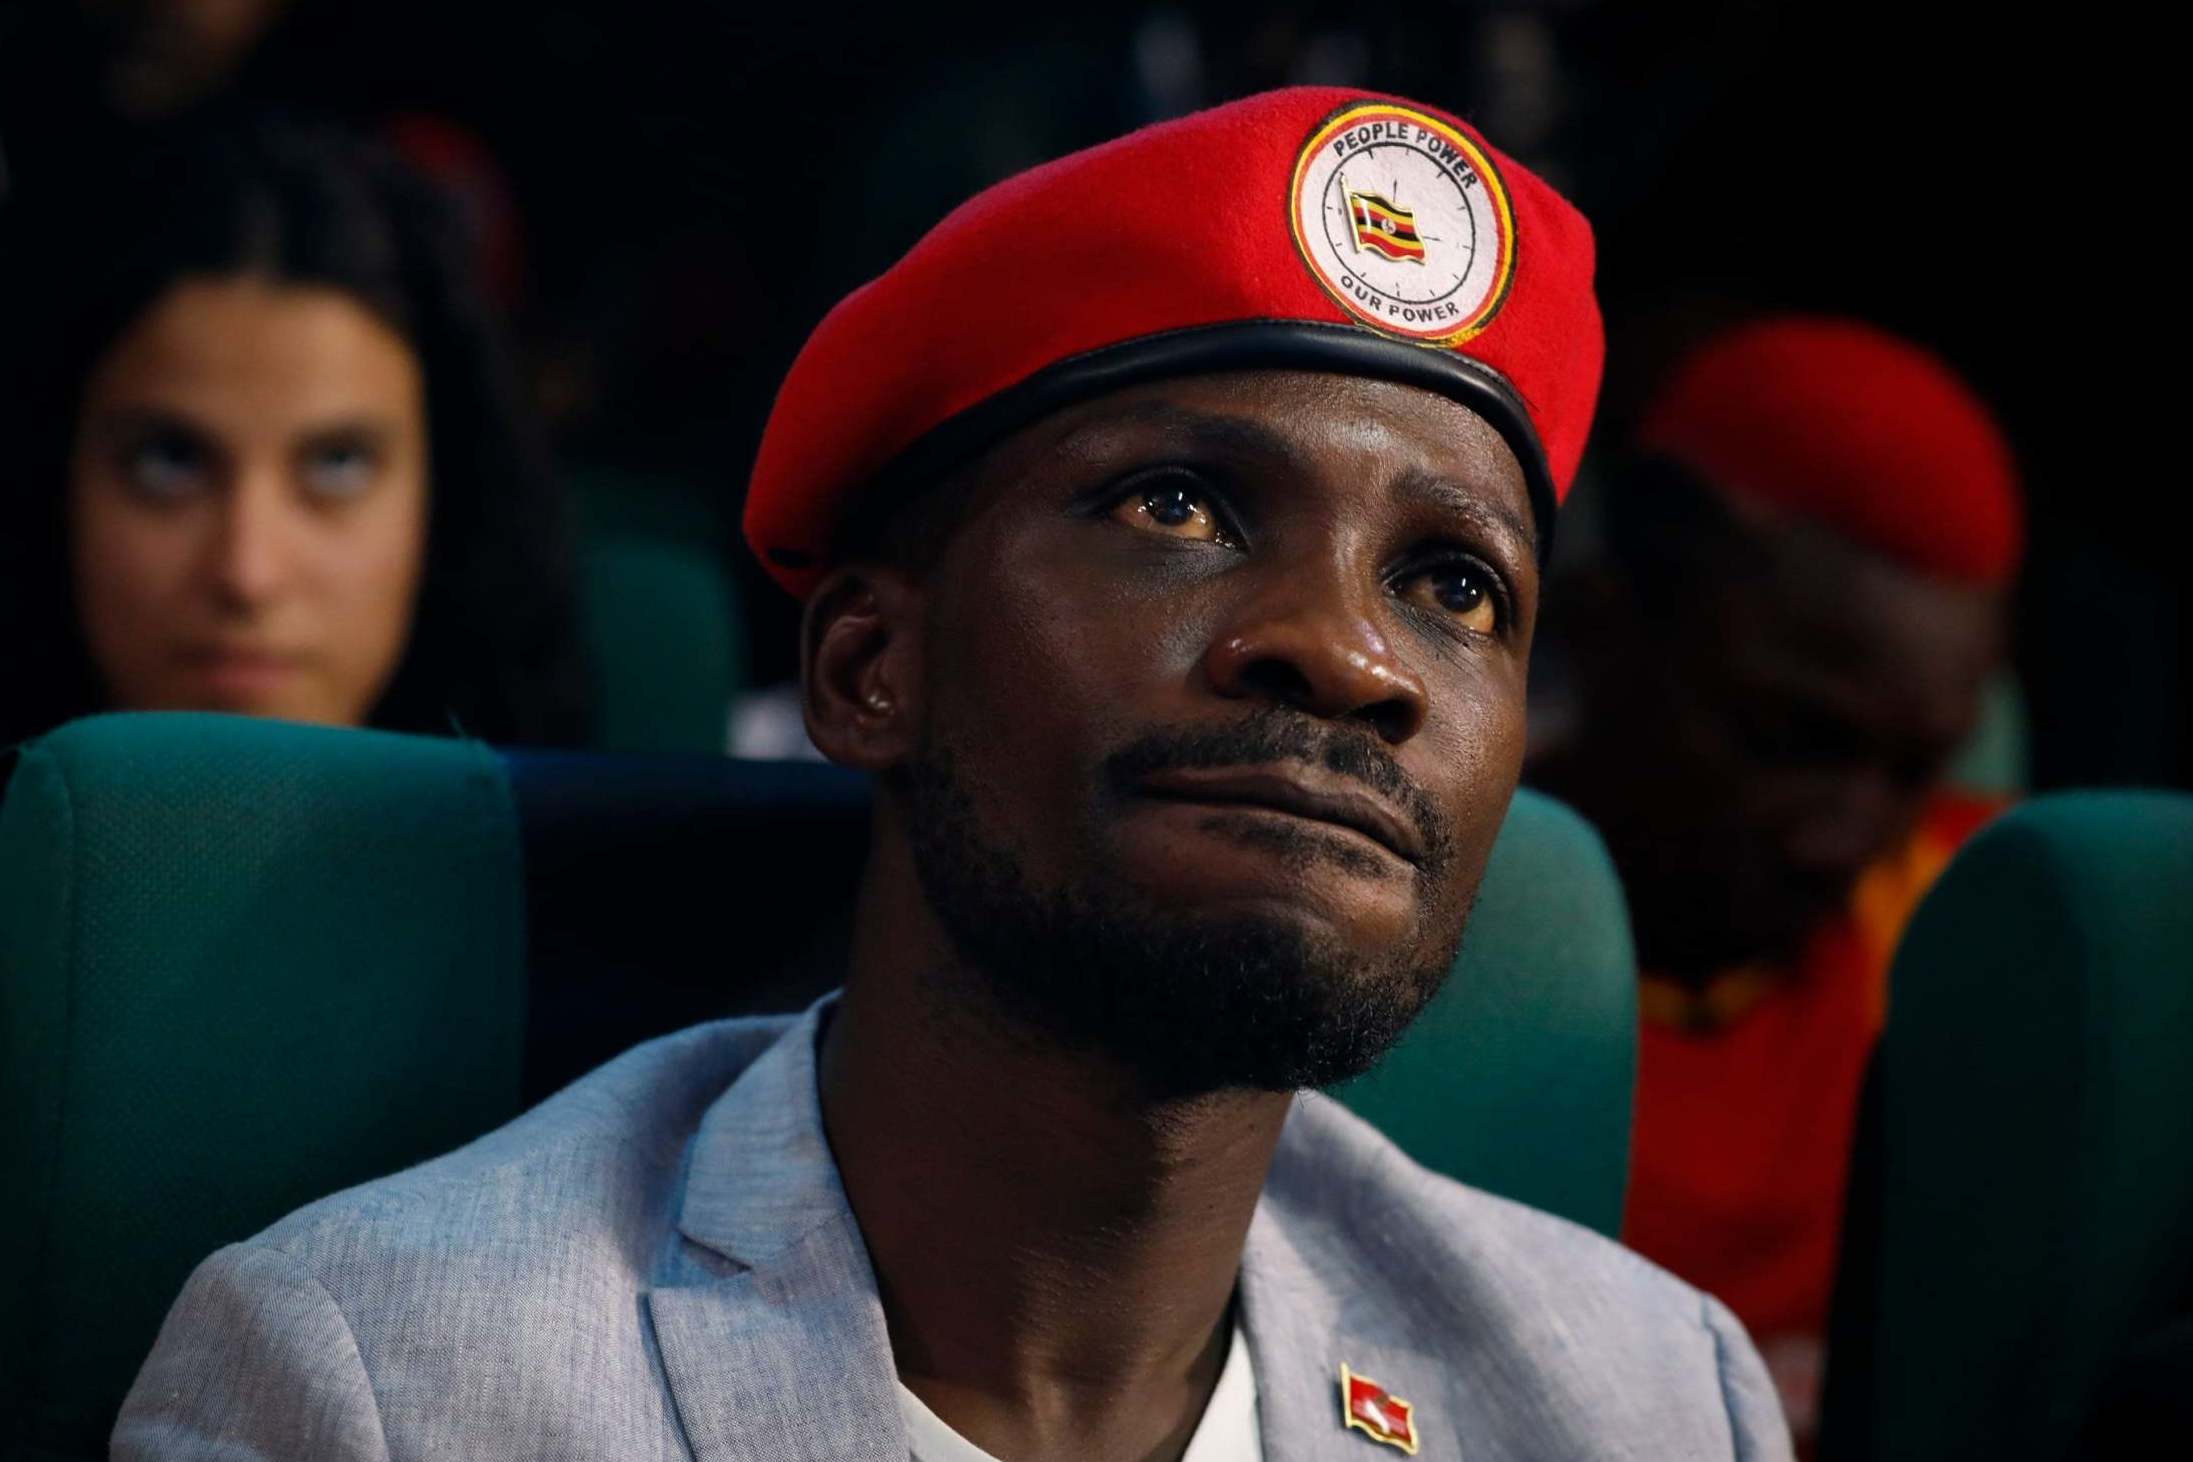 The red beret has become a trademark uniform of Bobi Wine and his supporters